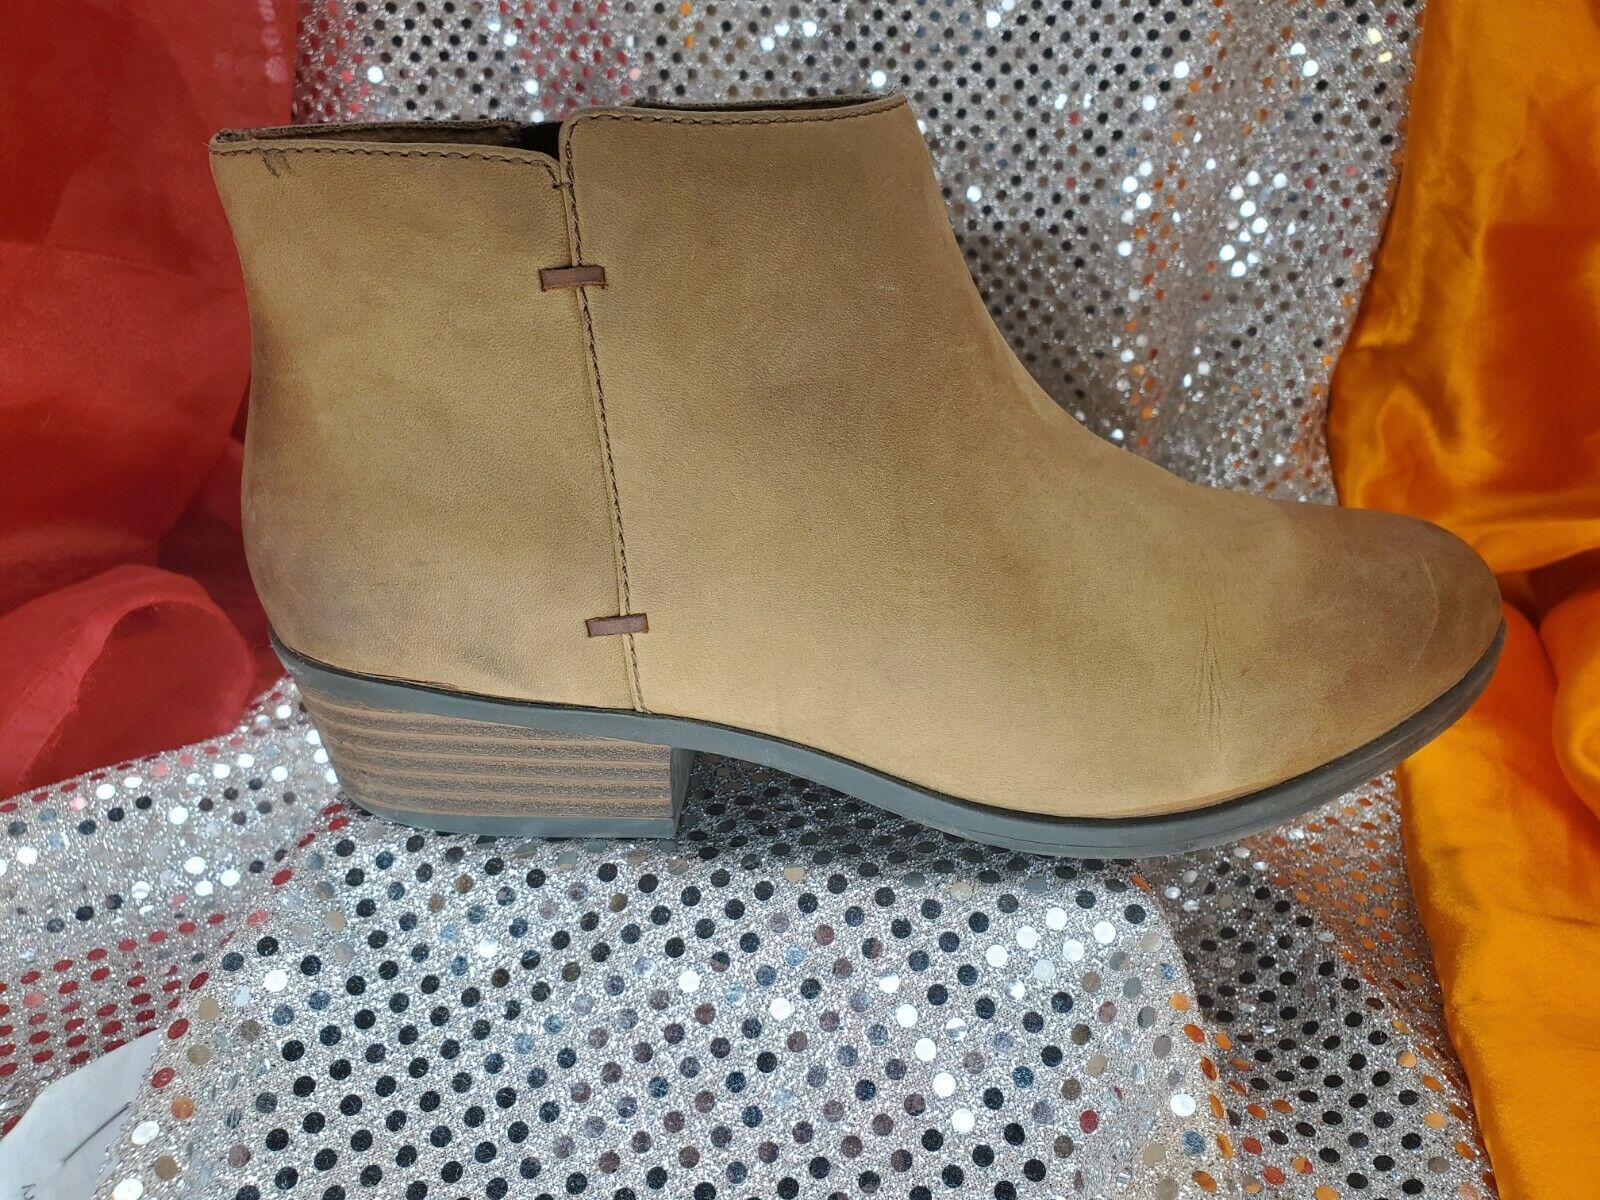 Clarks Addiy Tan Booties Size 6W with Box Pre-Owned | eBay